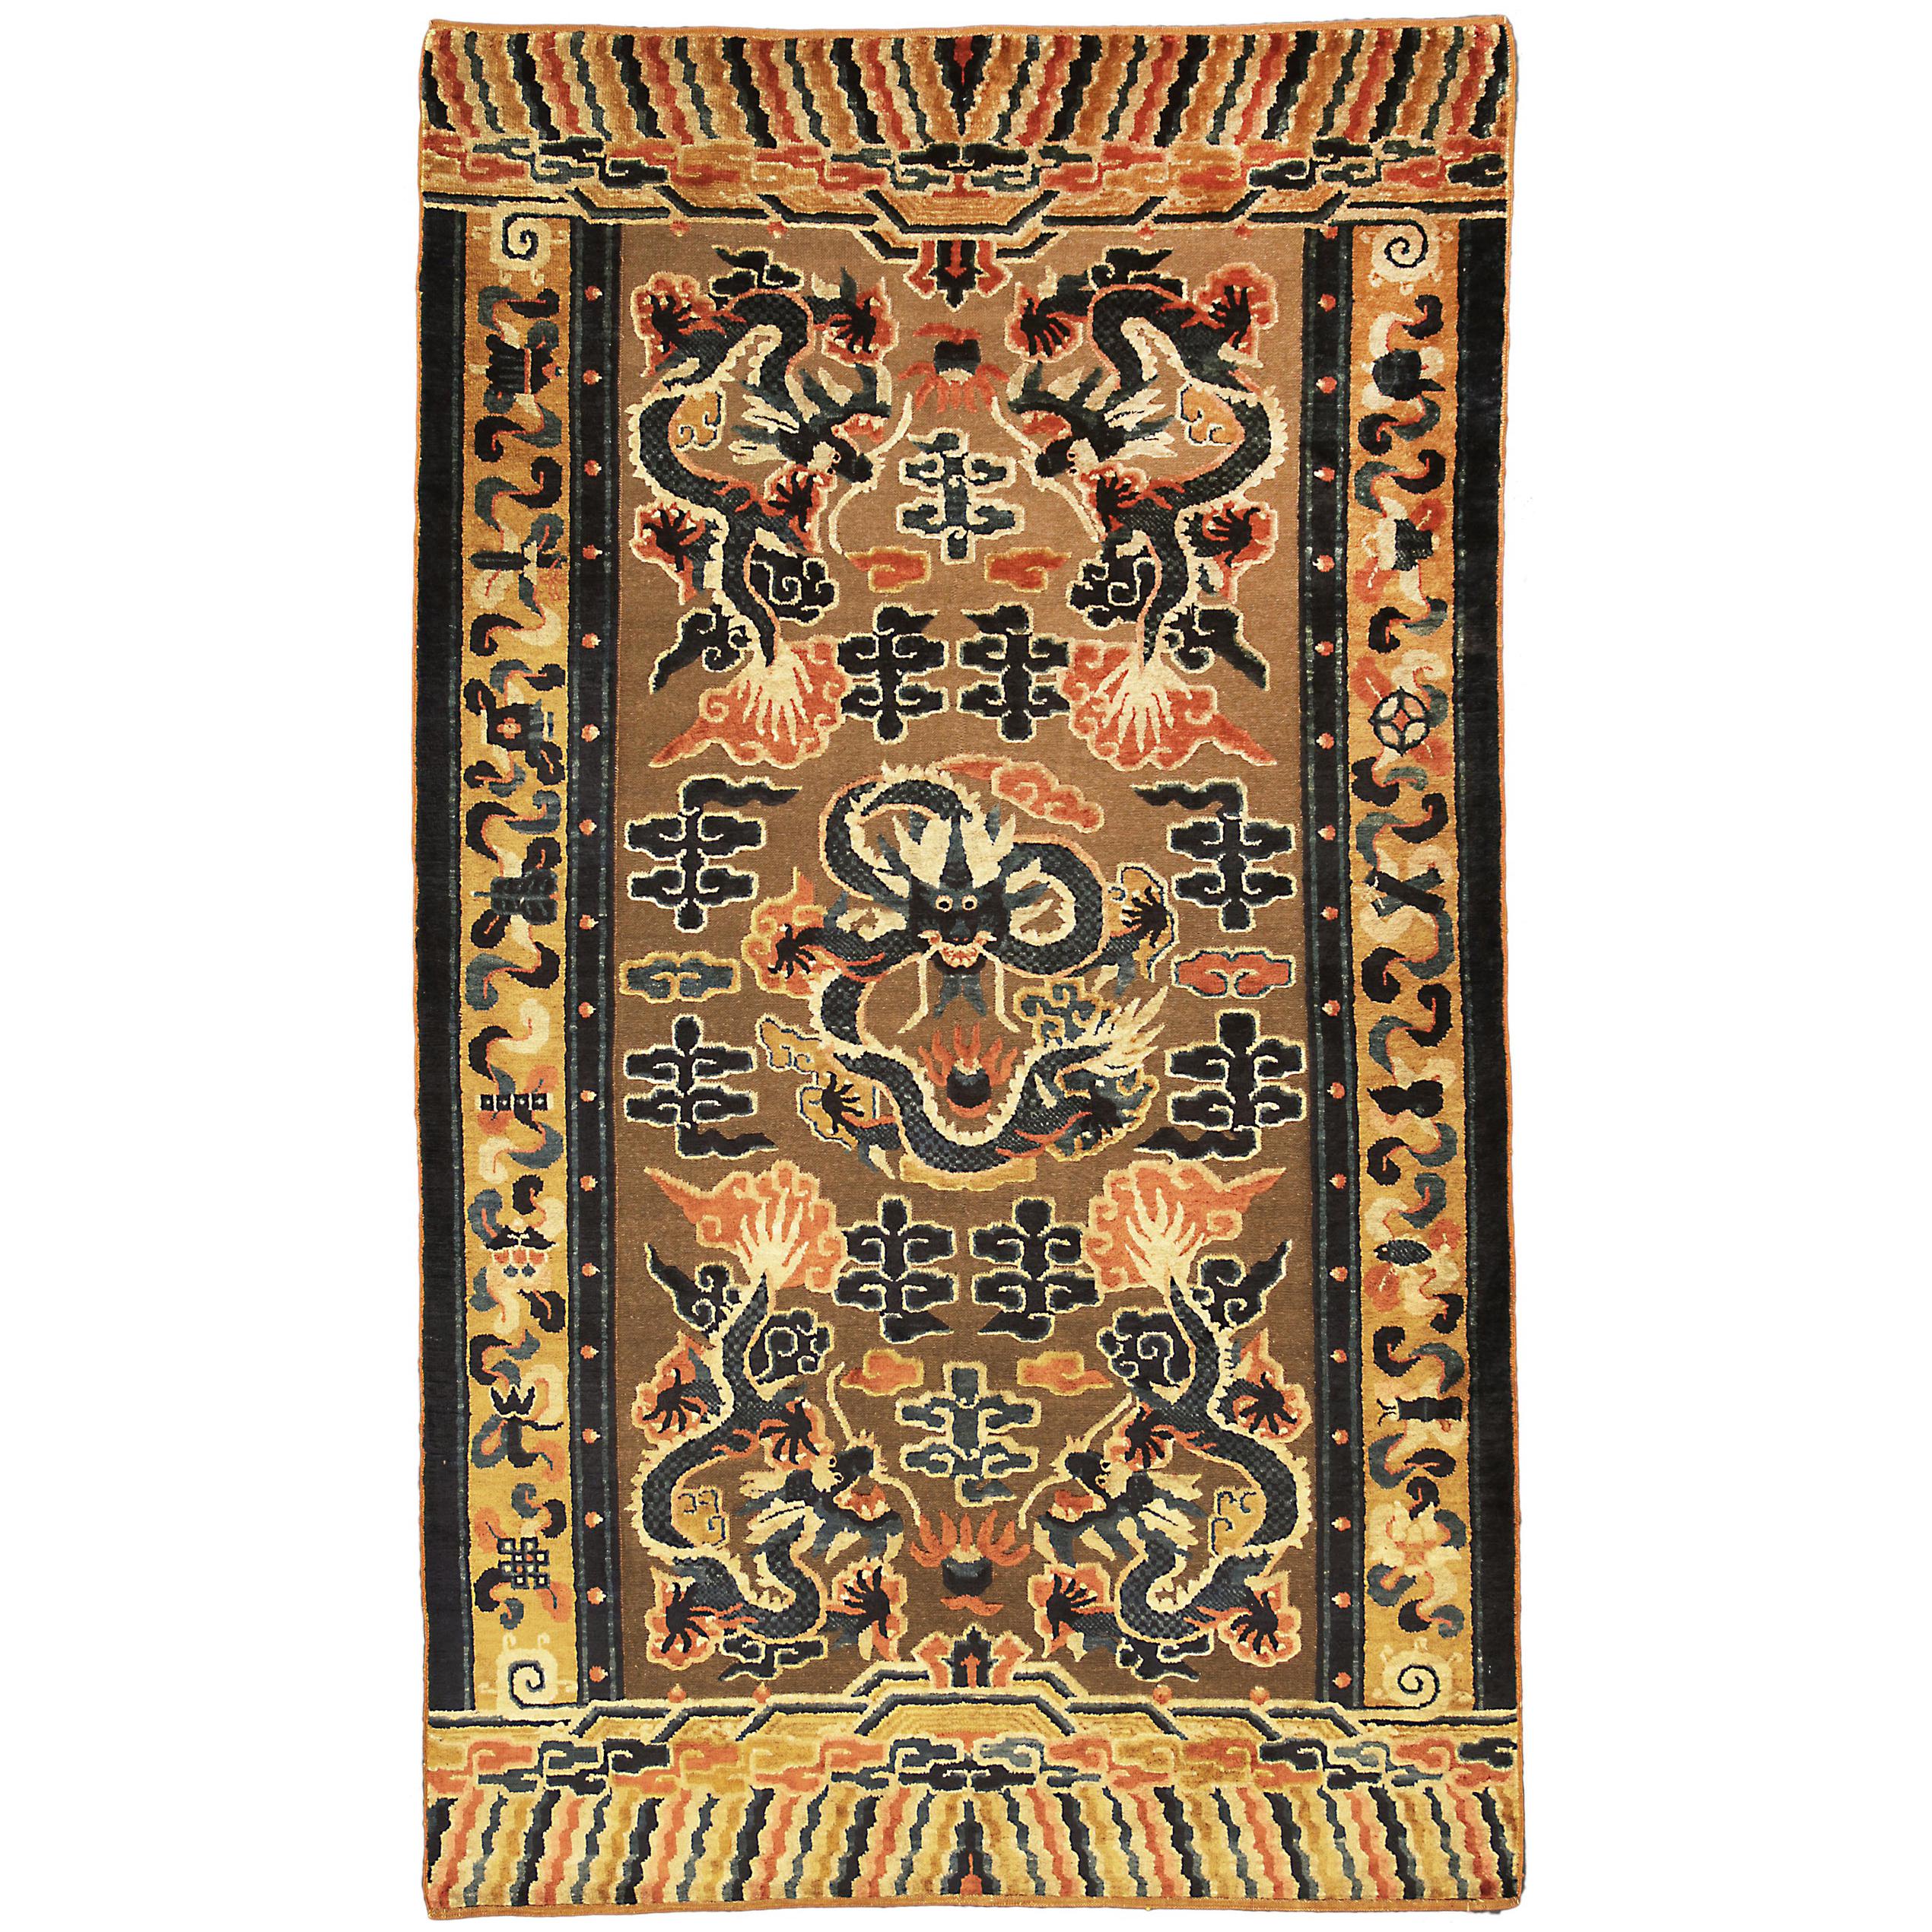 19th Century Ningxia Brown Metal-Thread Imperial Palace Souf Chinese Rug For Sale